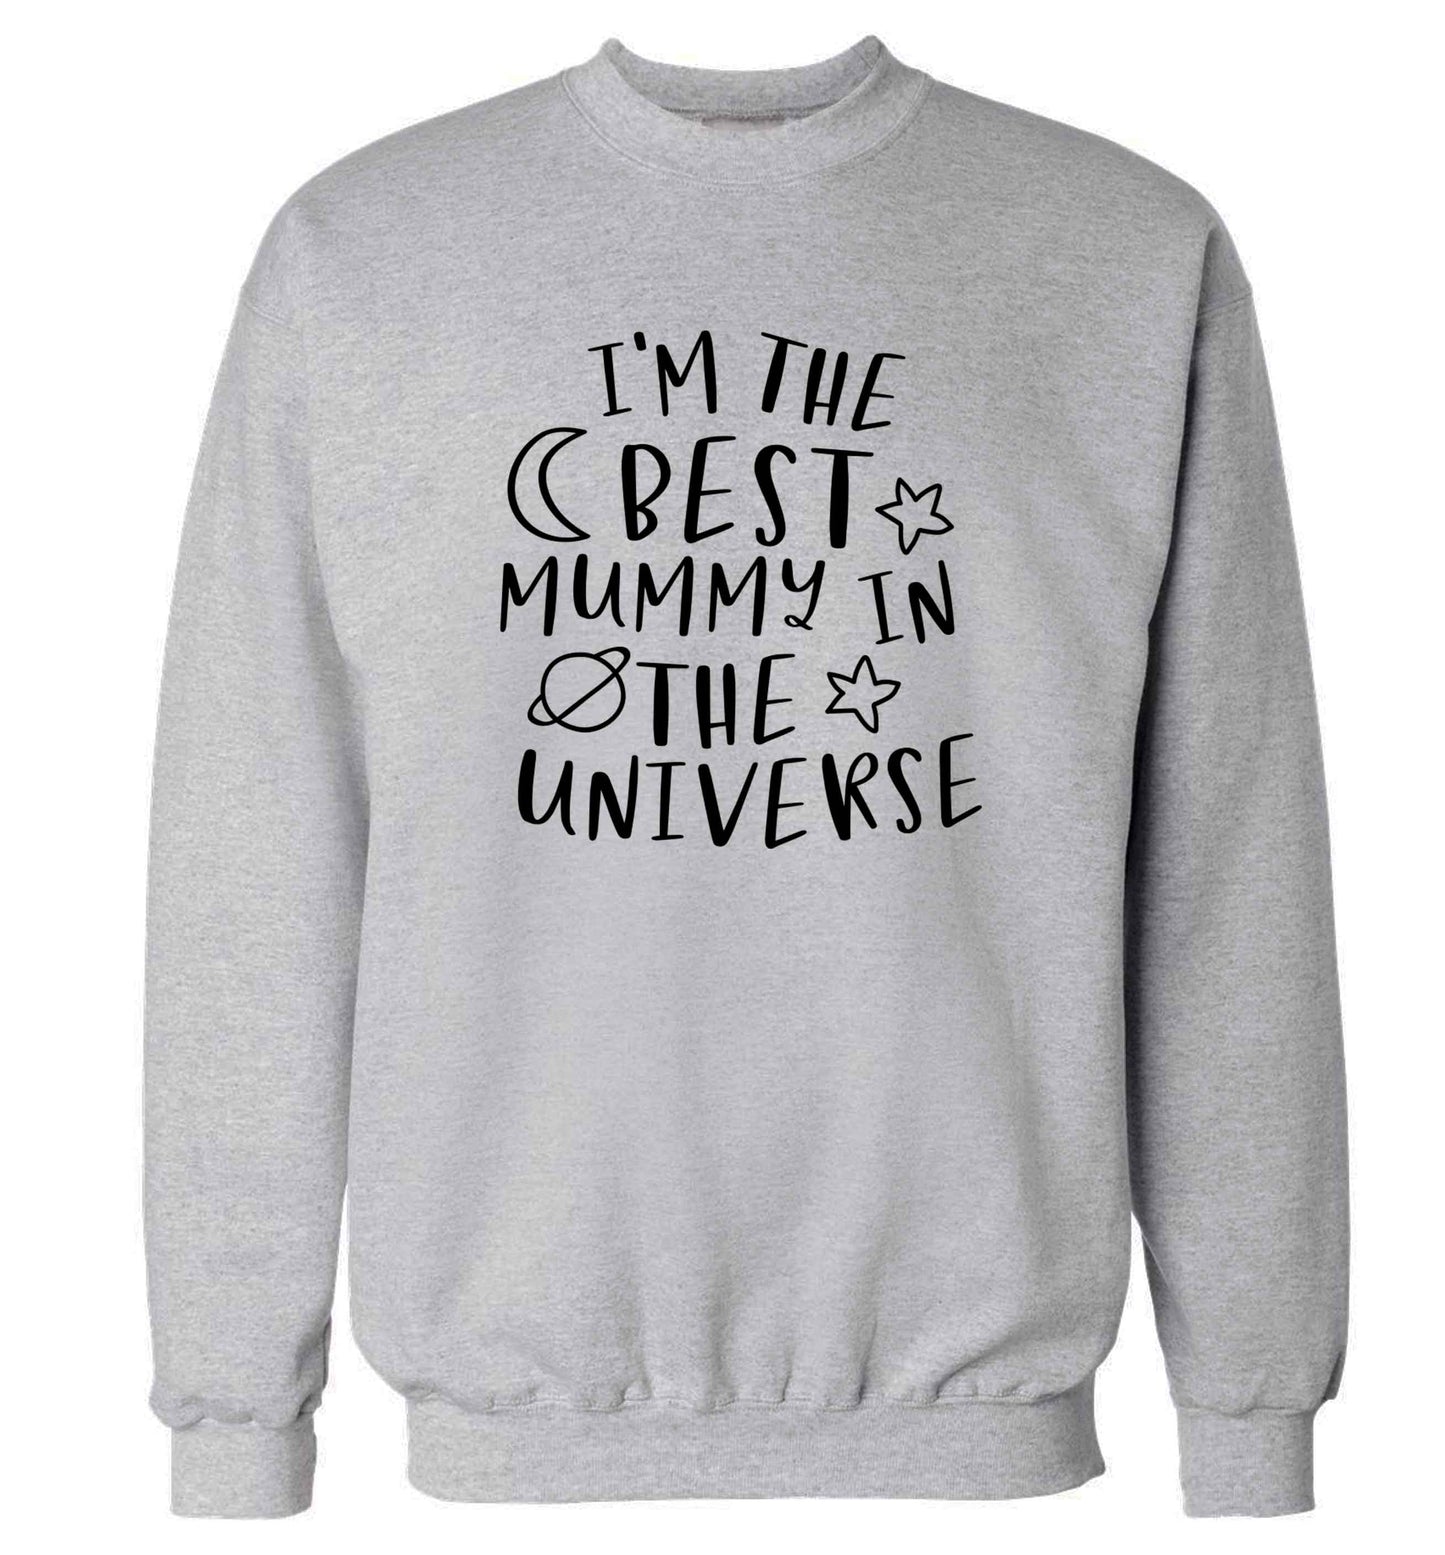 I'm the best mummy in the universe adult's unisex grey sweater 2XL